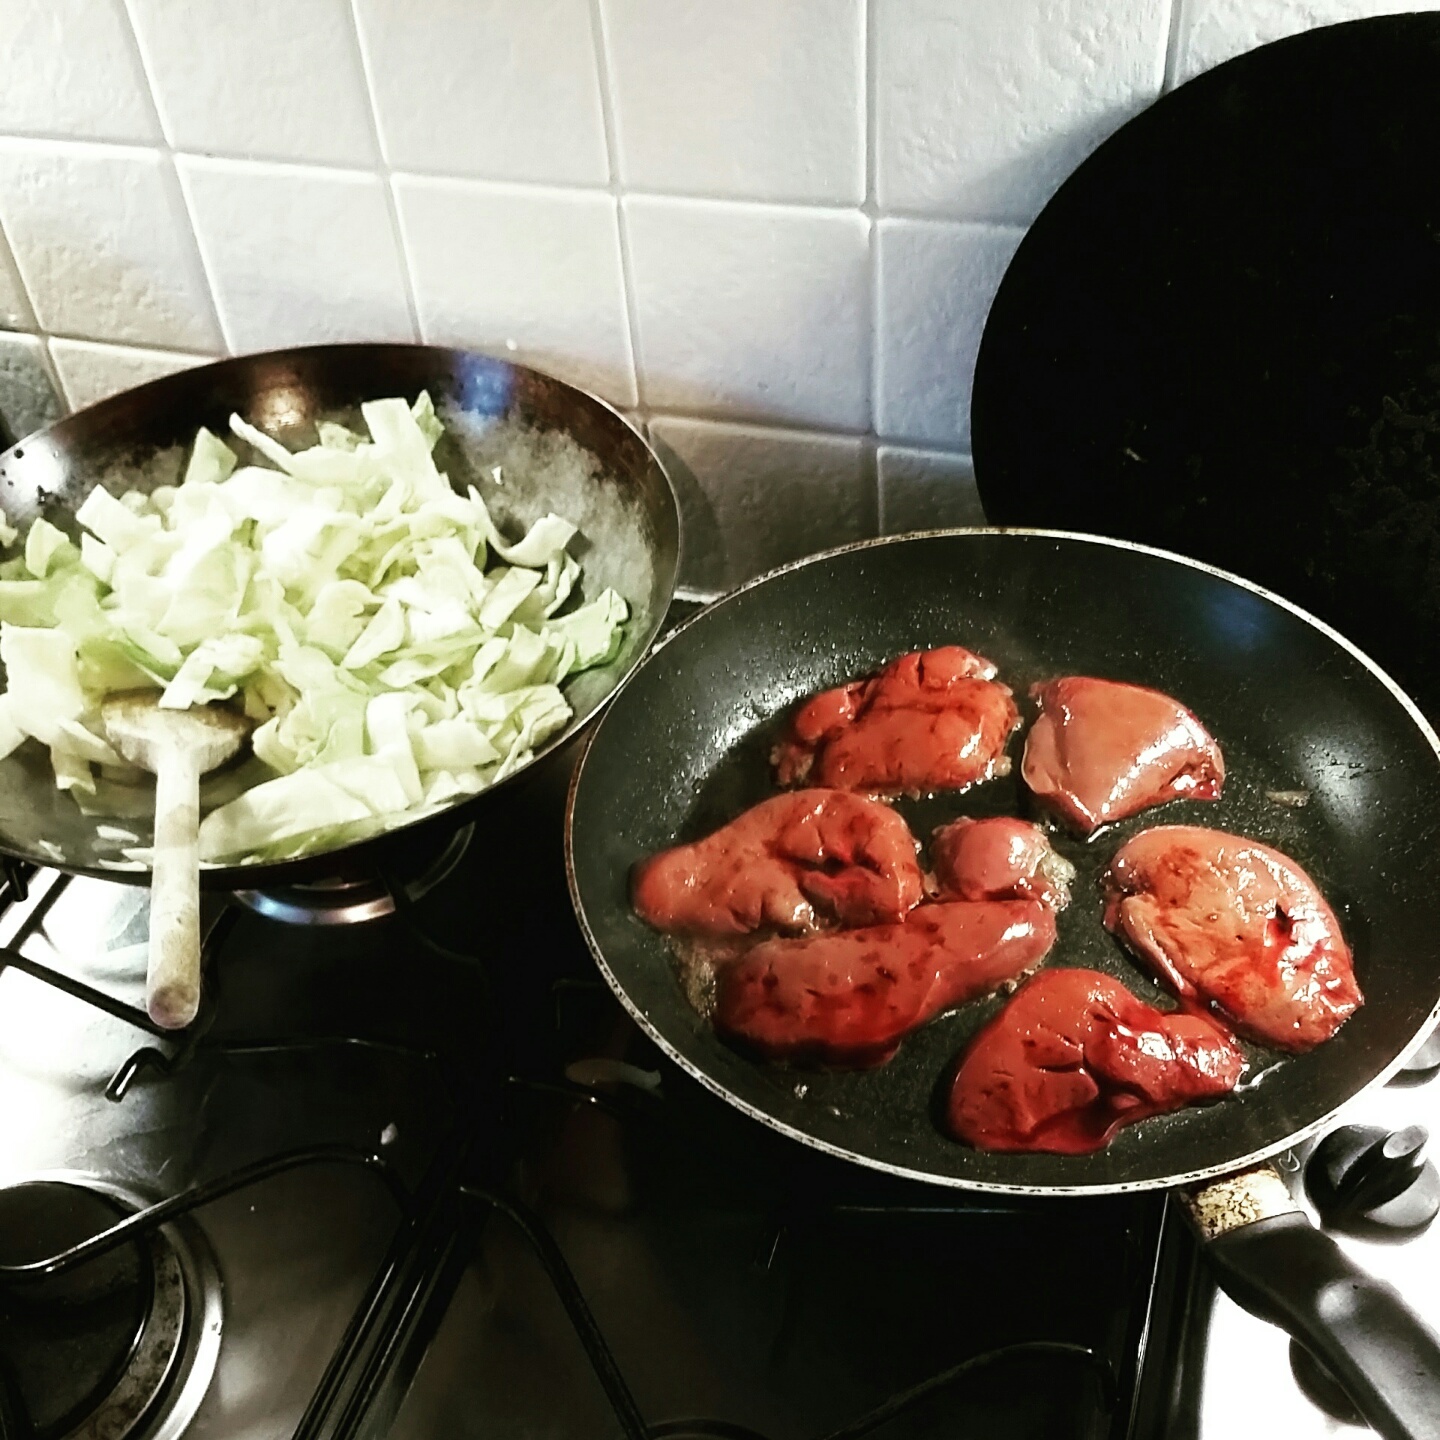 Liver and cabbage cooking